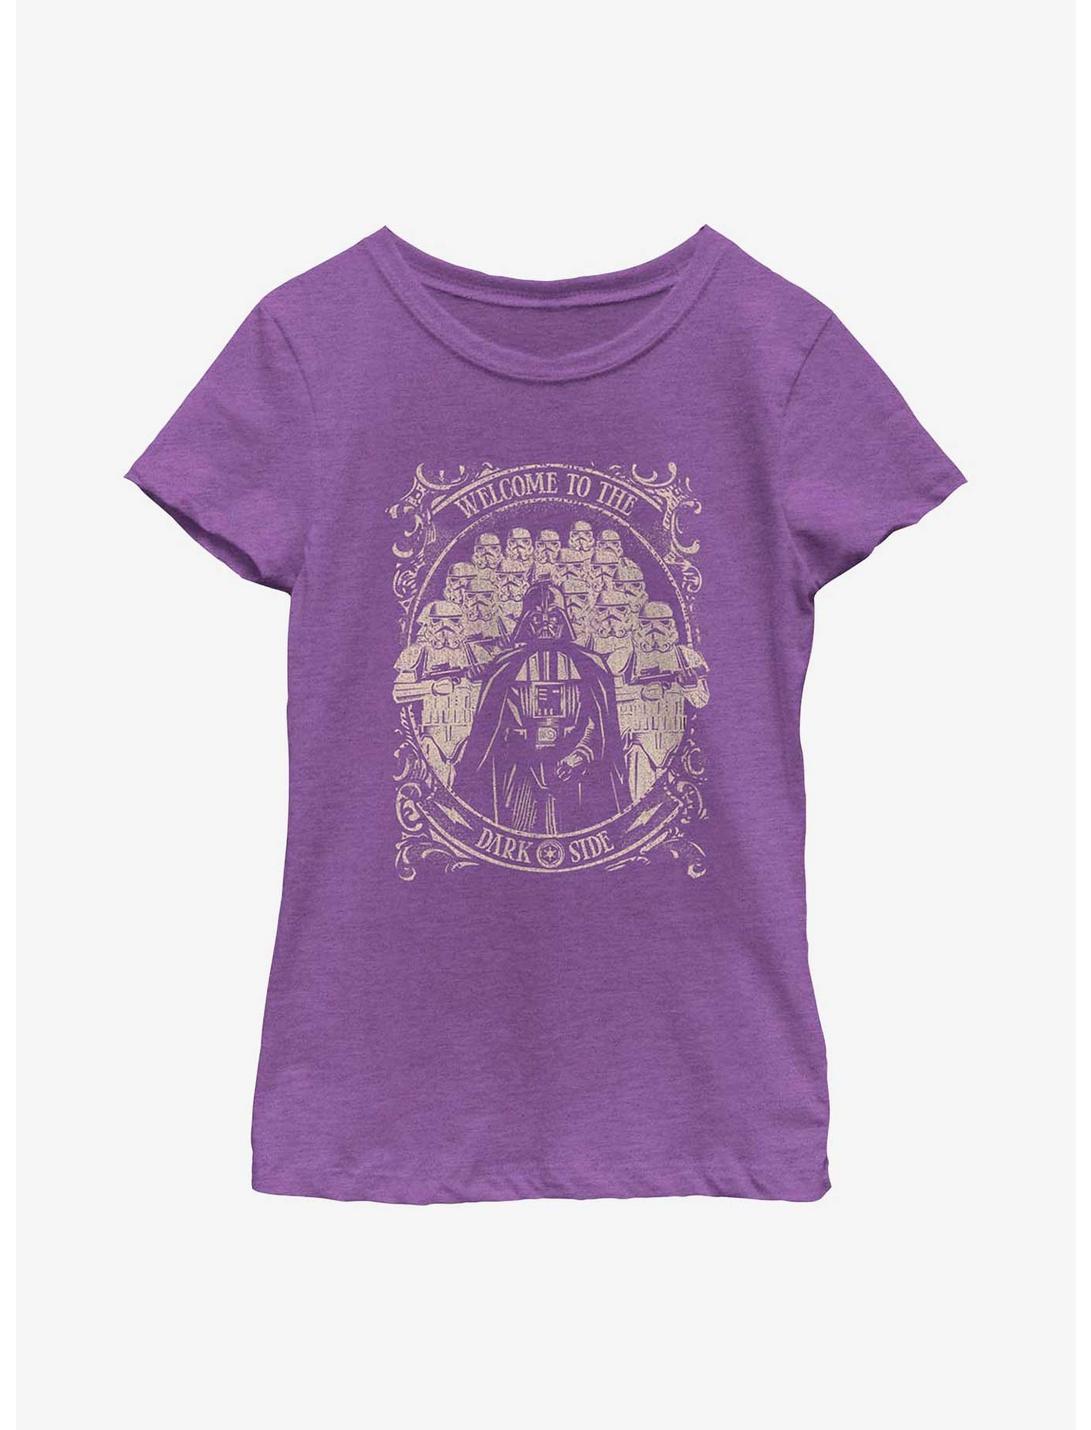 Star Wars Welcome To The Dark Side Youth Girls T-Shirt, PURPLE BERRY, hi-res